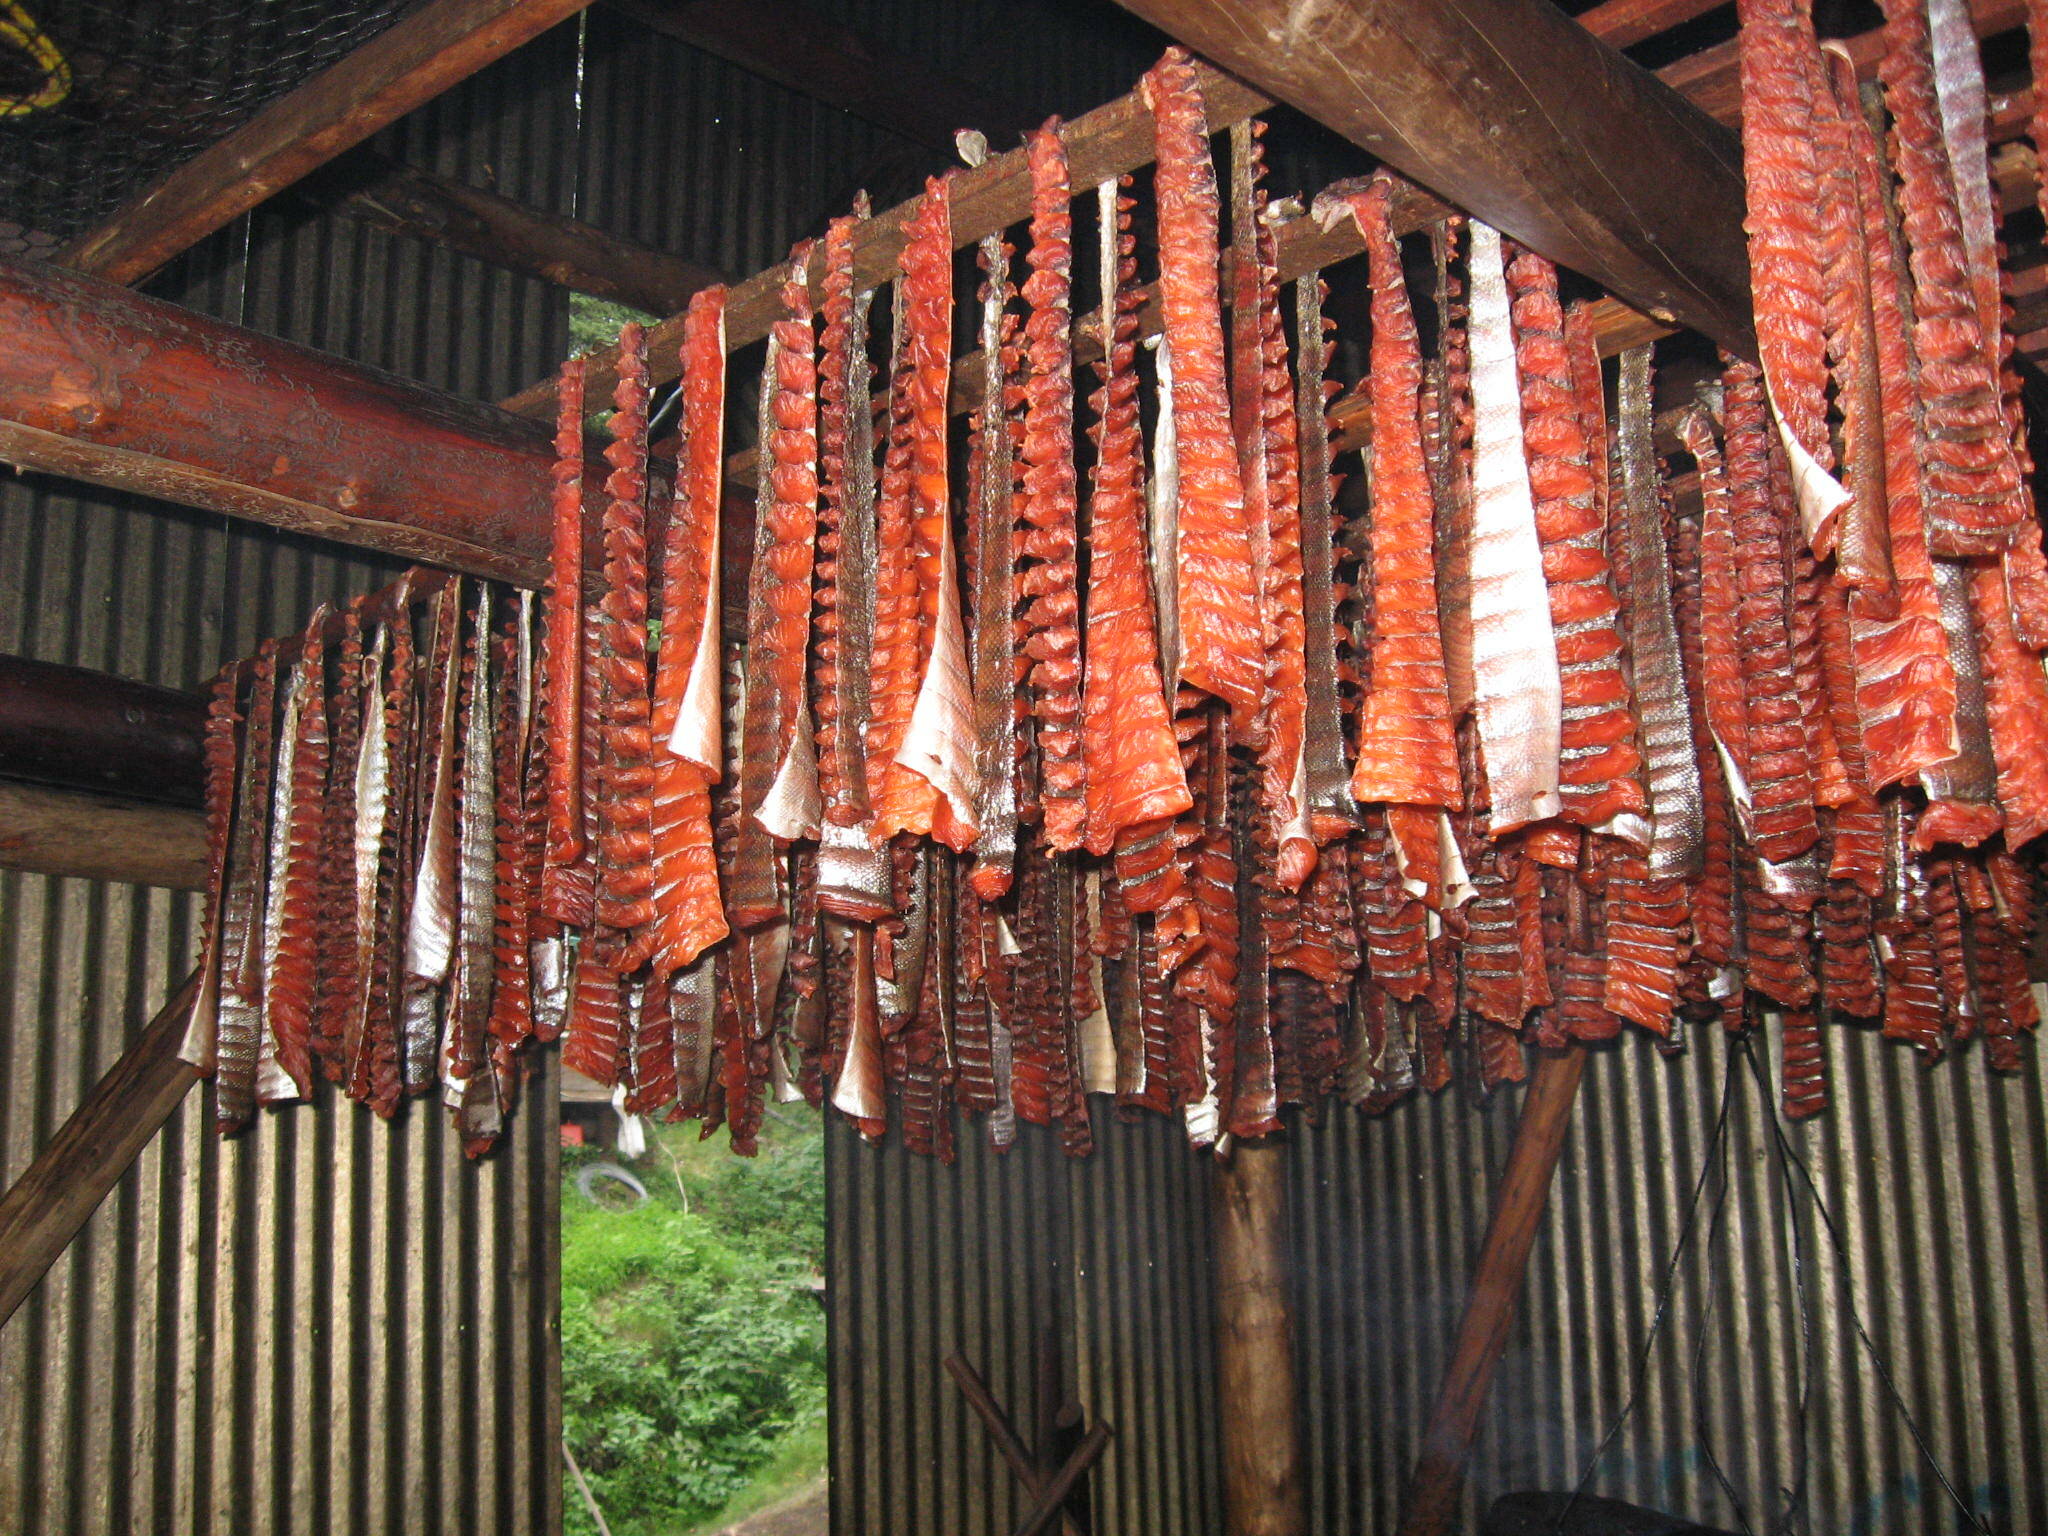 Strips of chum salmon hang on a drying rack on Aug. 22, 2007. A new study by federal and state biologists identies marine heat waves in the Bering Sea and Gulf of Alaska as the likely culprit in the recent crashes of Western Alaska chum salmon runs. (Photo by S.Zuray / U.S. Fish and Wildlife Service)